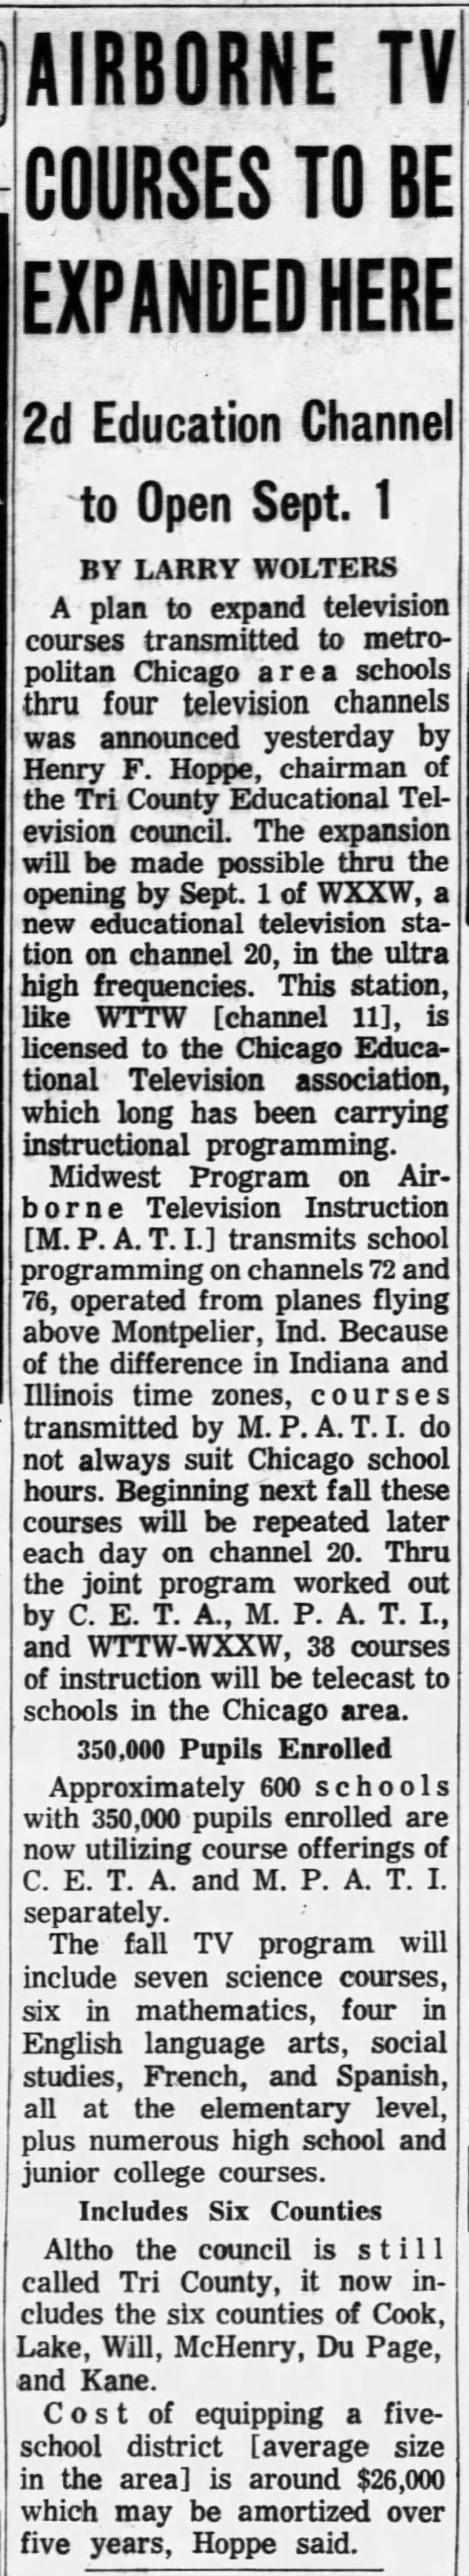 Airborne TV Courses to Be Expanded Here: 2d Education Channel to Open Sept. 1